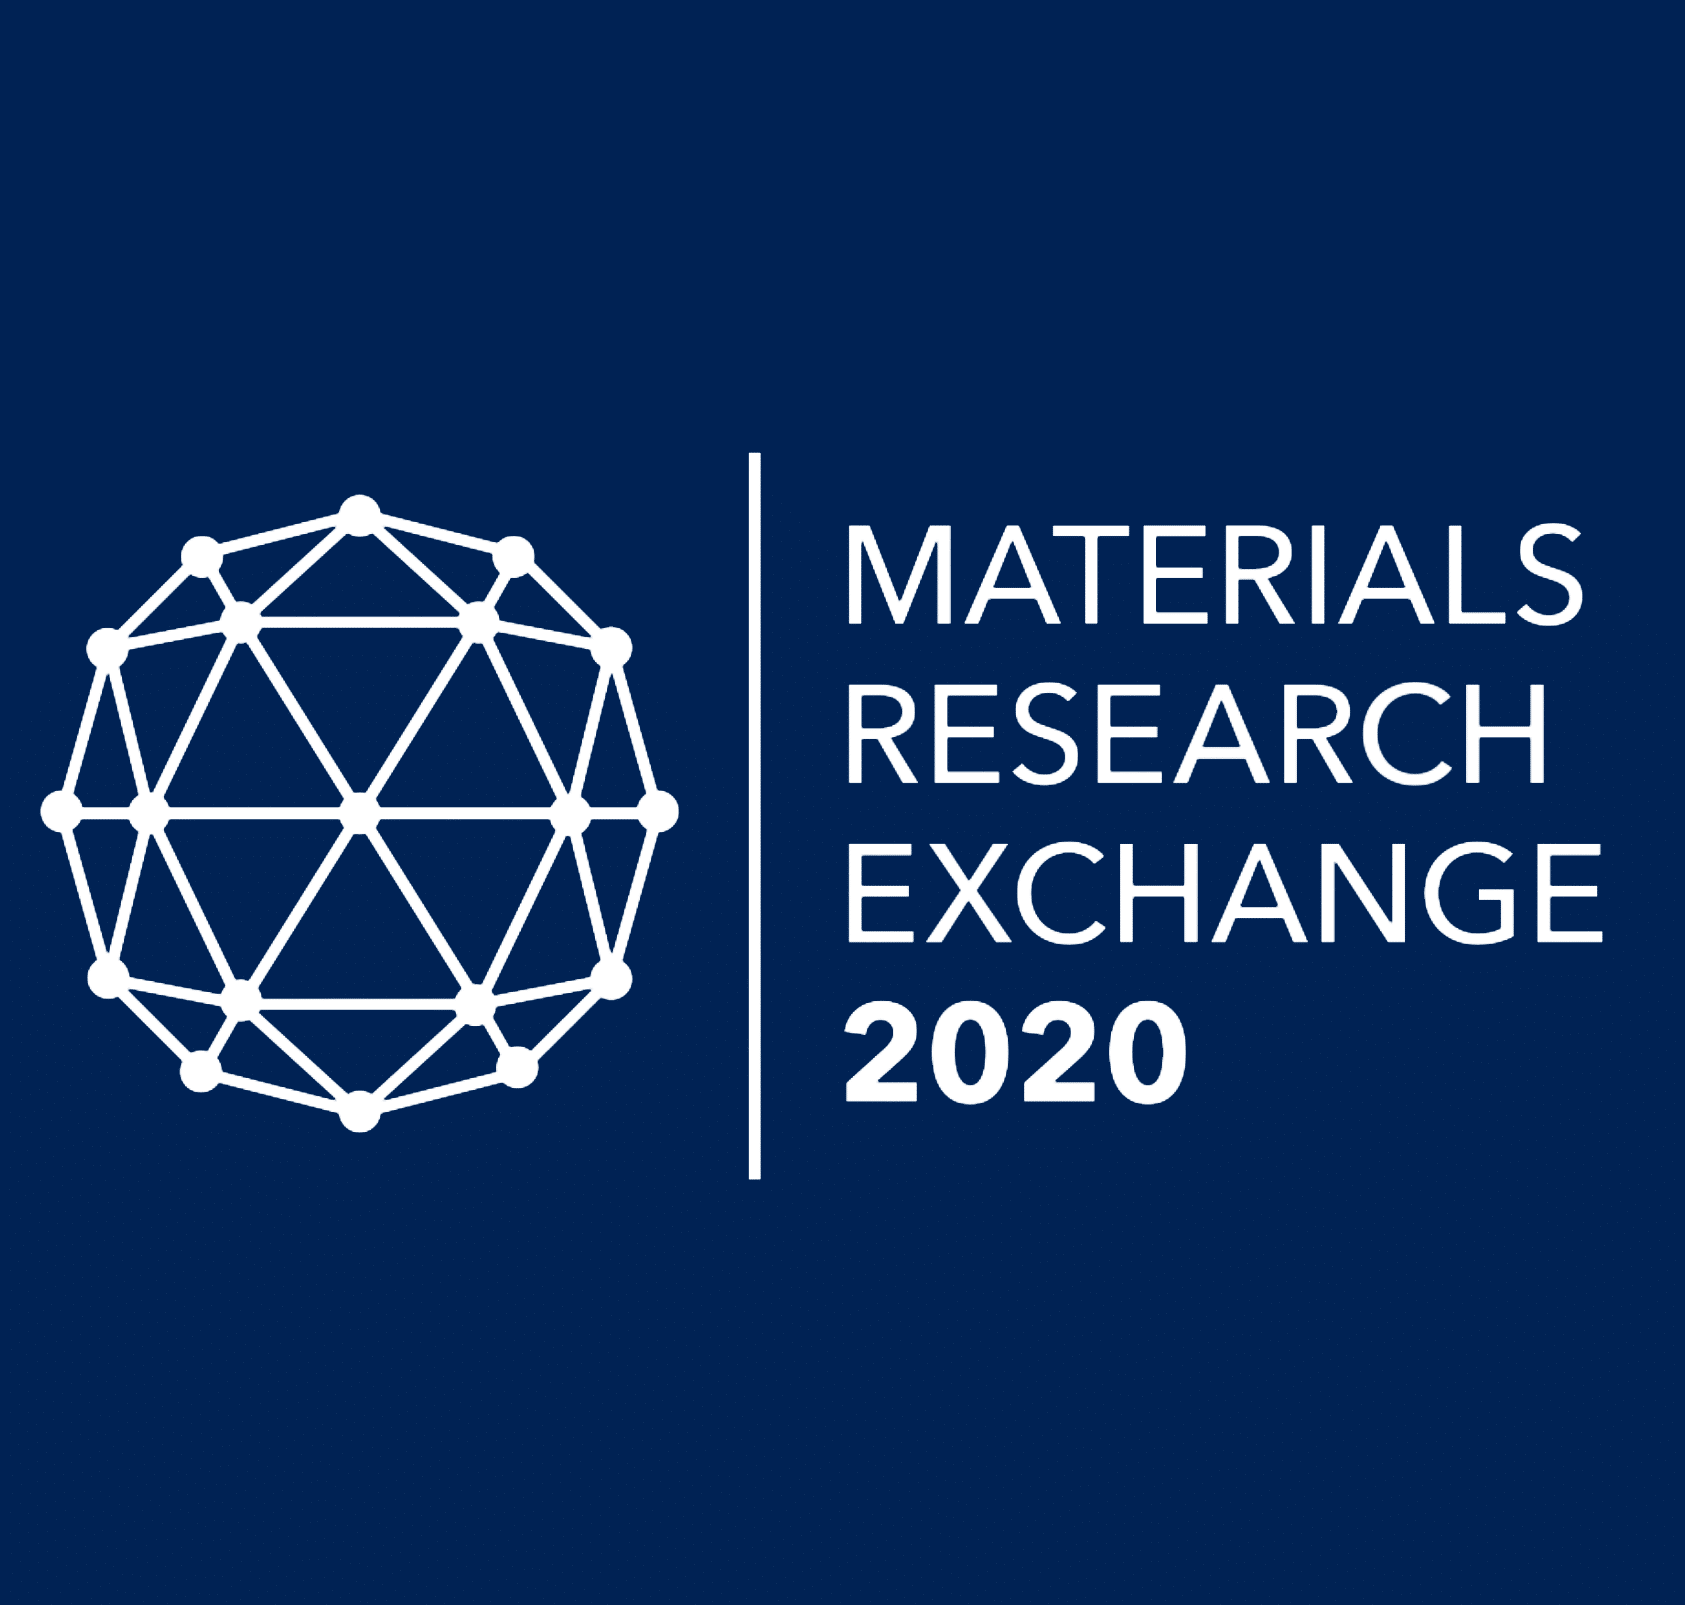 Materials Research Exchange 2020